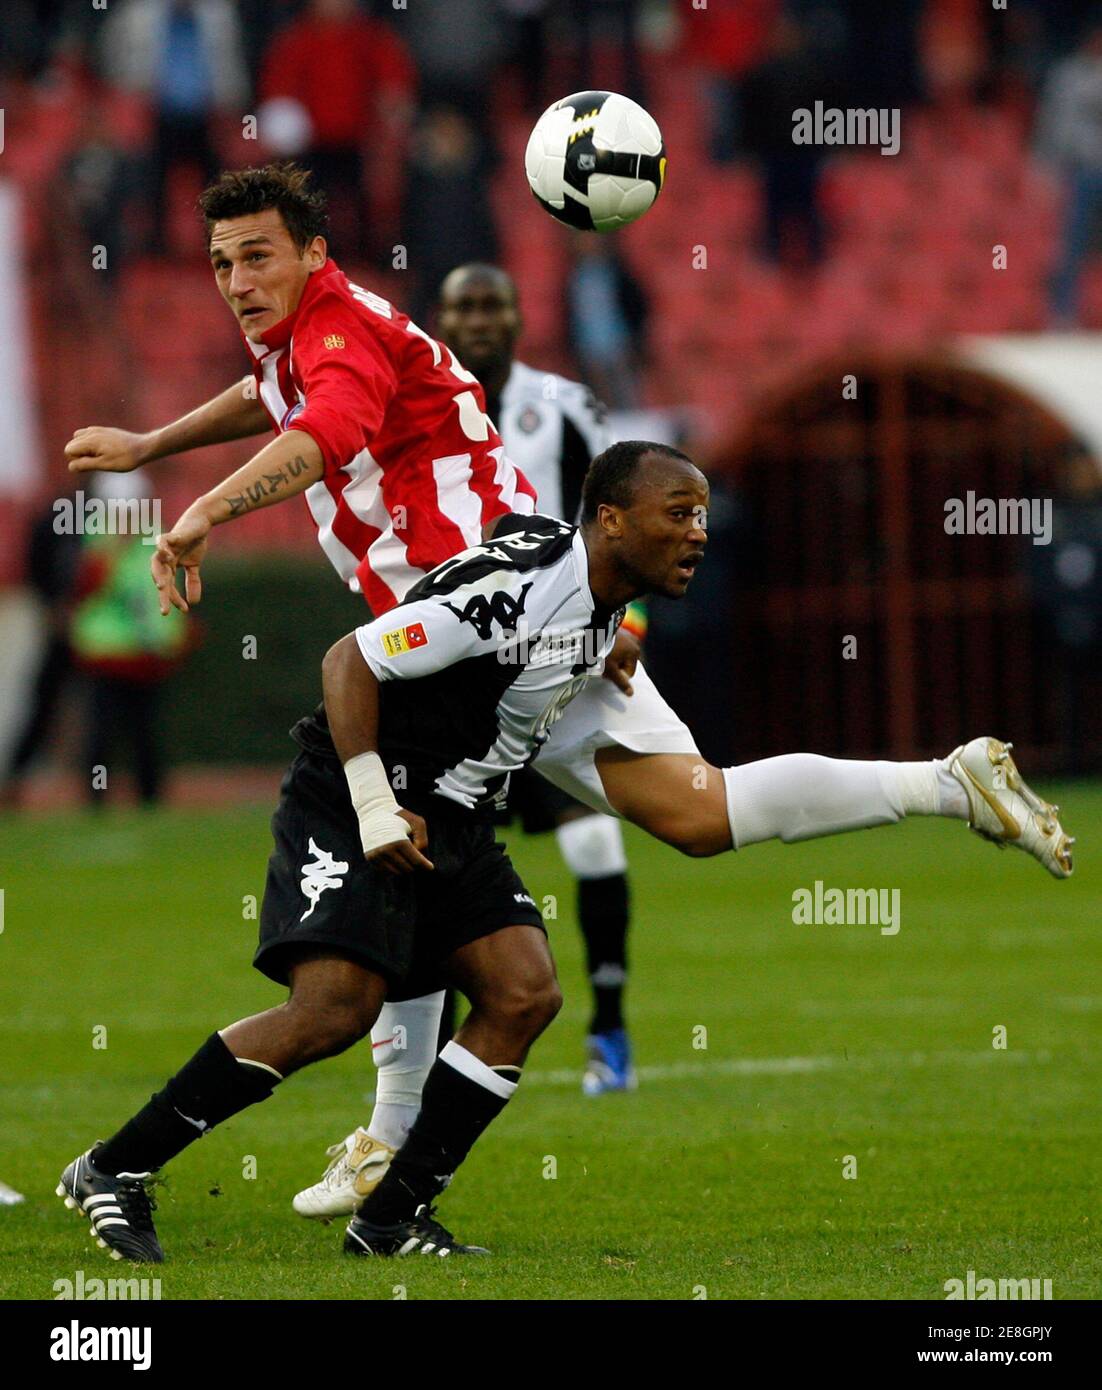 Red Star's Vladimir Bogdanovic (L) jumps for the ball with Partizan's Almani Moreira during their Serbia first division derby soccer match in Belgrade October 5, 2008. REUTERS/Ivan Milutinovic  (SERBIA) Stock Photo